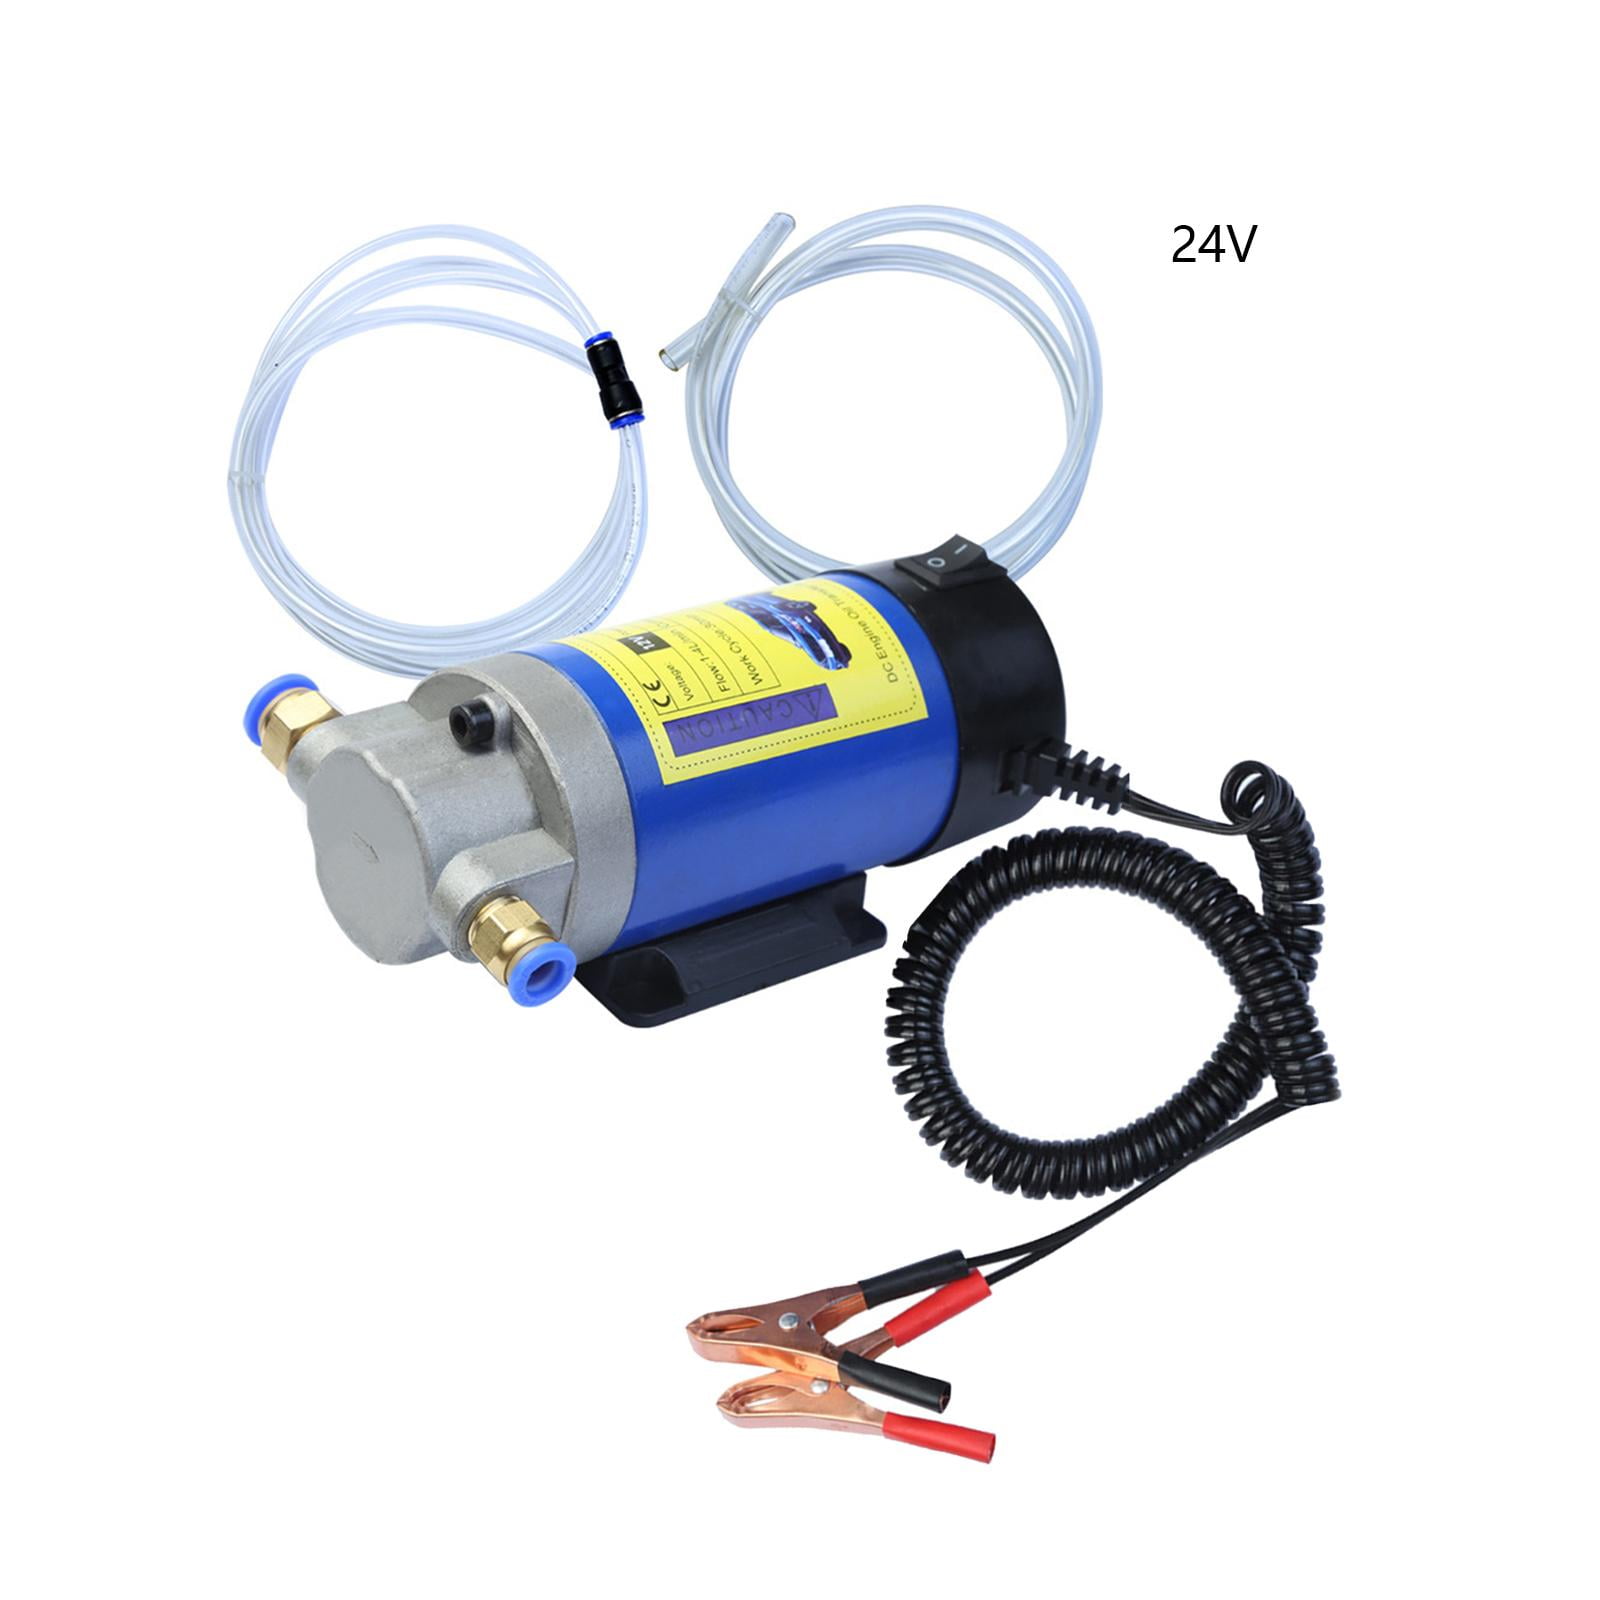 Oil Change Pump Extractor 100W Suction Transfer Pump for ATV Auto